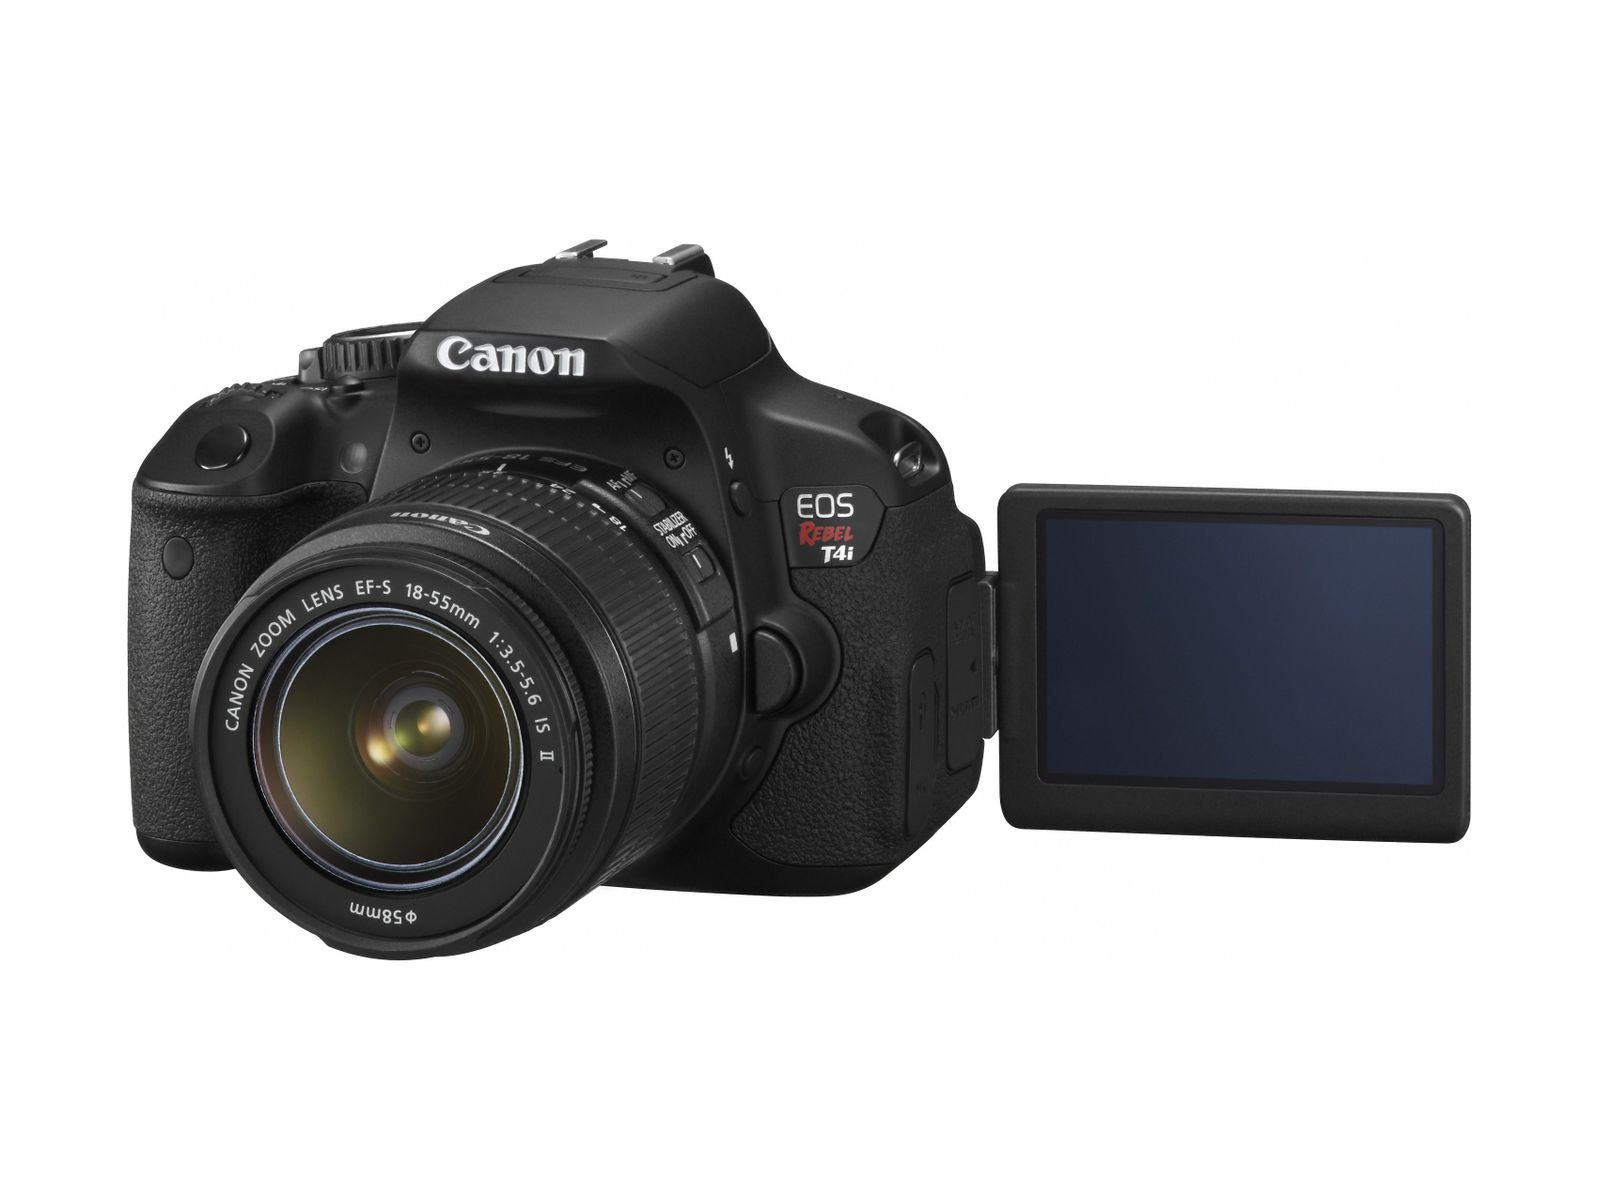 Canon 6558B003 EOS Rebel T4i 18-135mm is TM Lens Kit 18MP SLR Camera with 3-Inch LCD Body (Black)